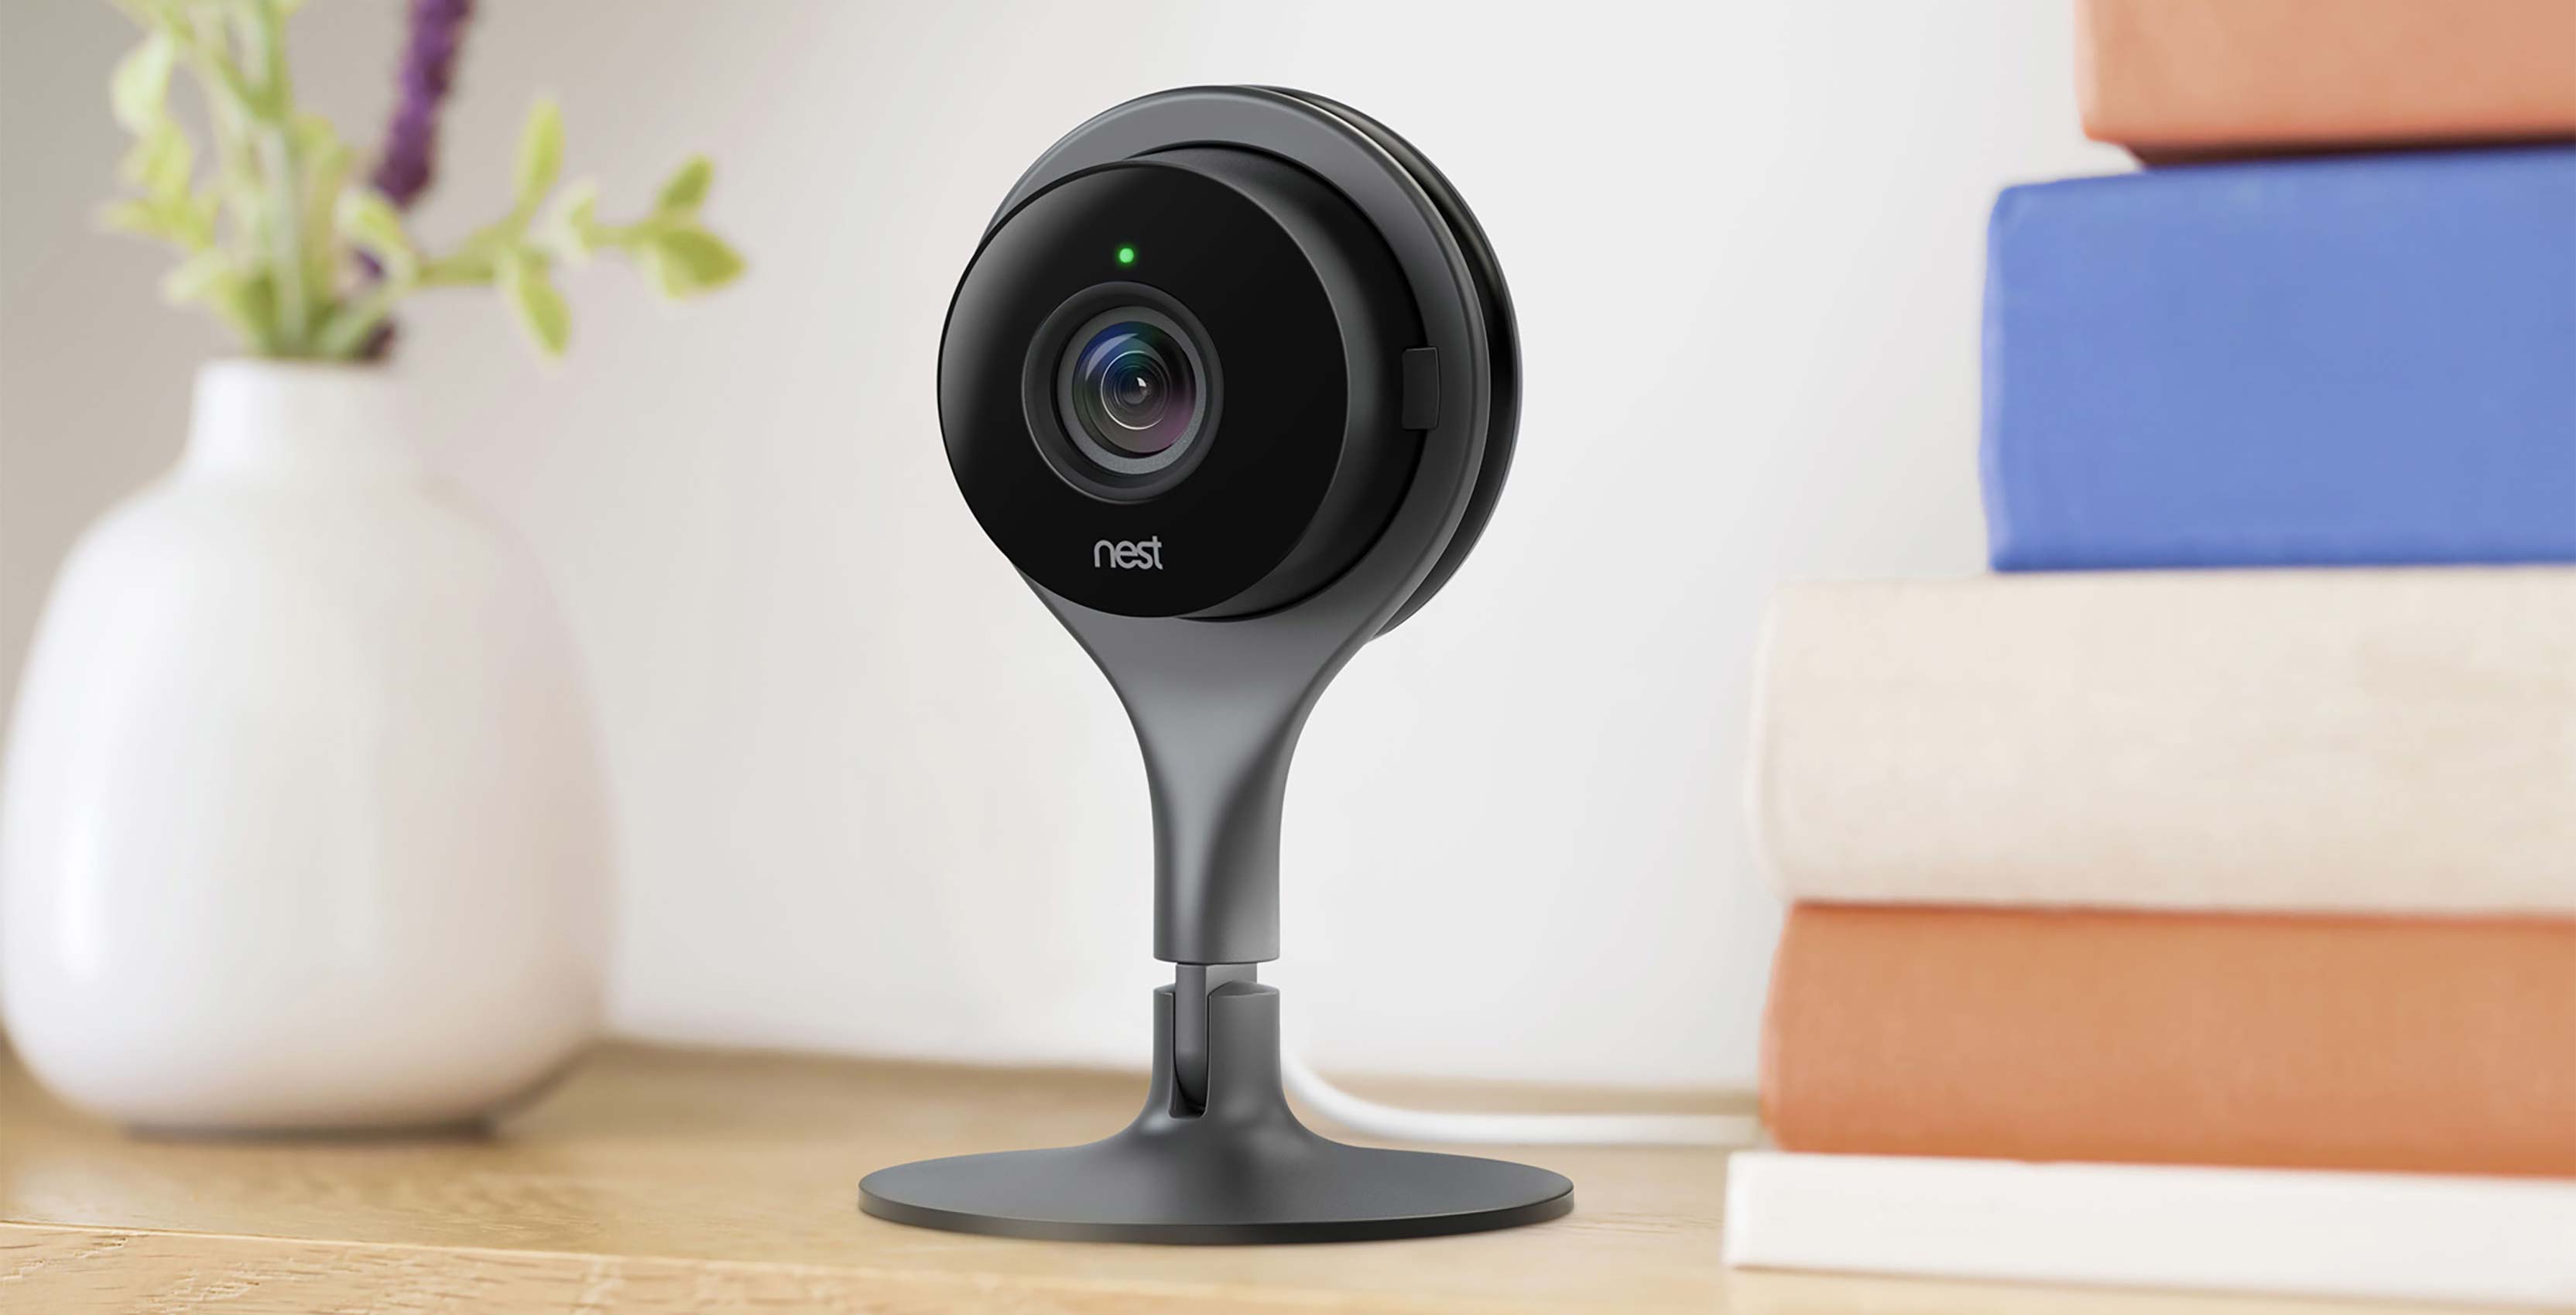 Stock photo of nest cam sitting on a table